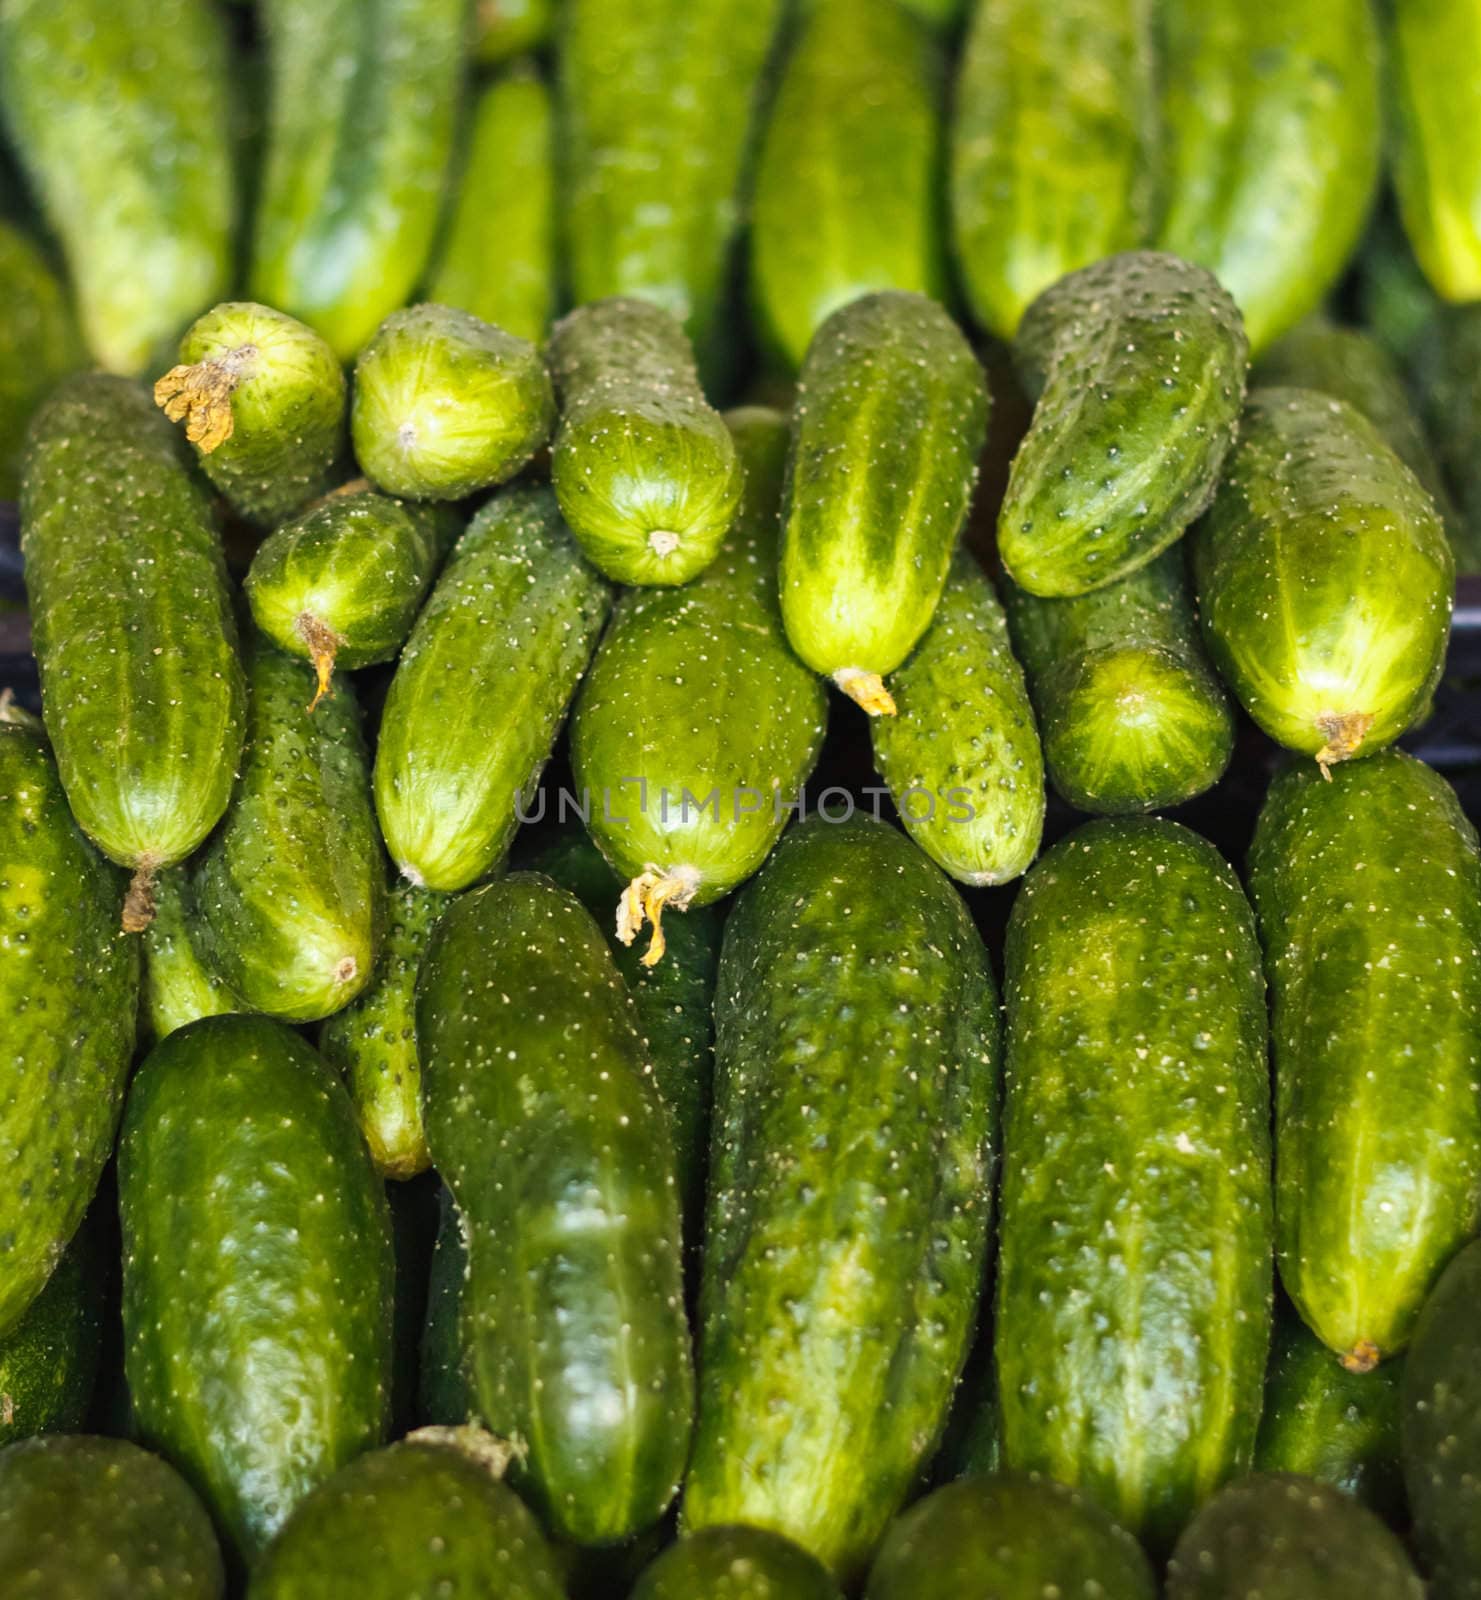 Cucumbers bunched together For Sale At Market good as a background